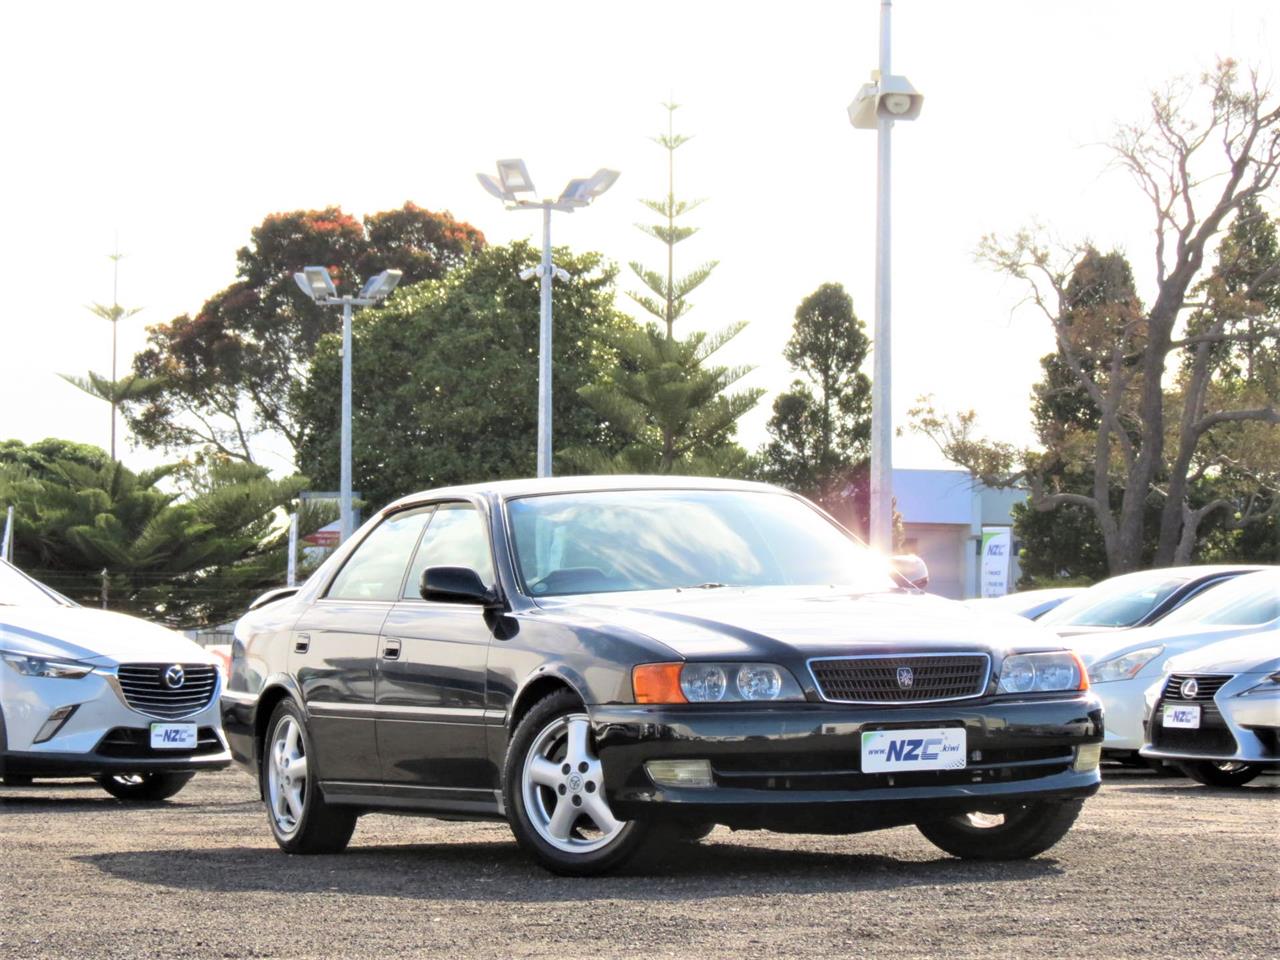 NZC 1997 Toyota CHASER just arrived to Auckland